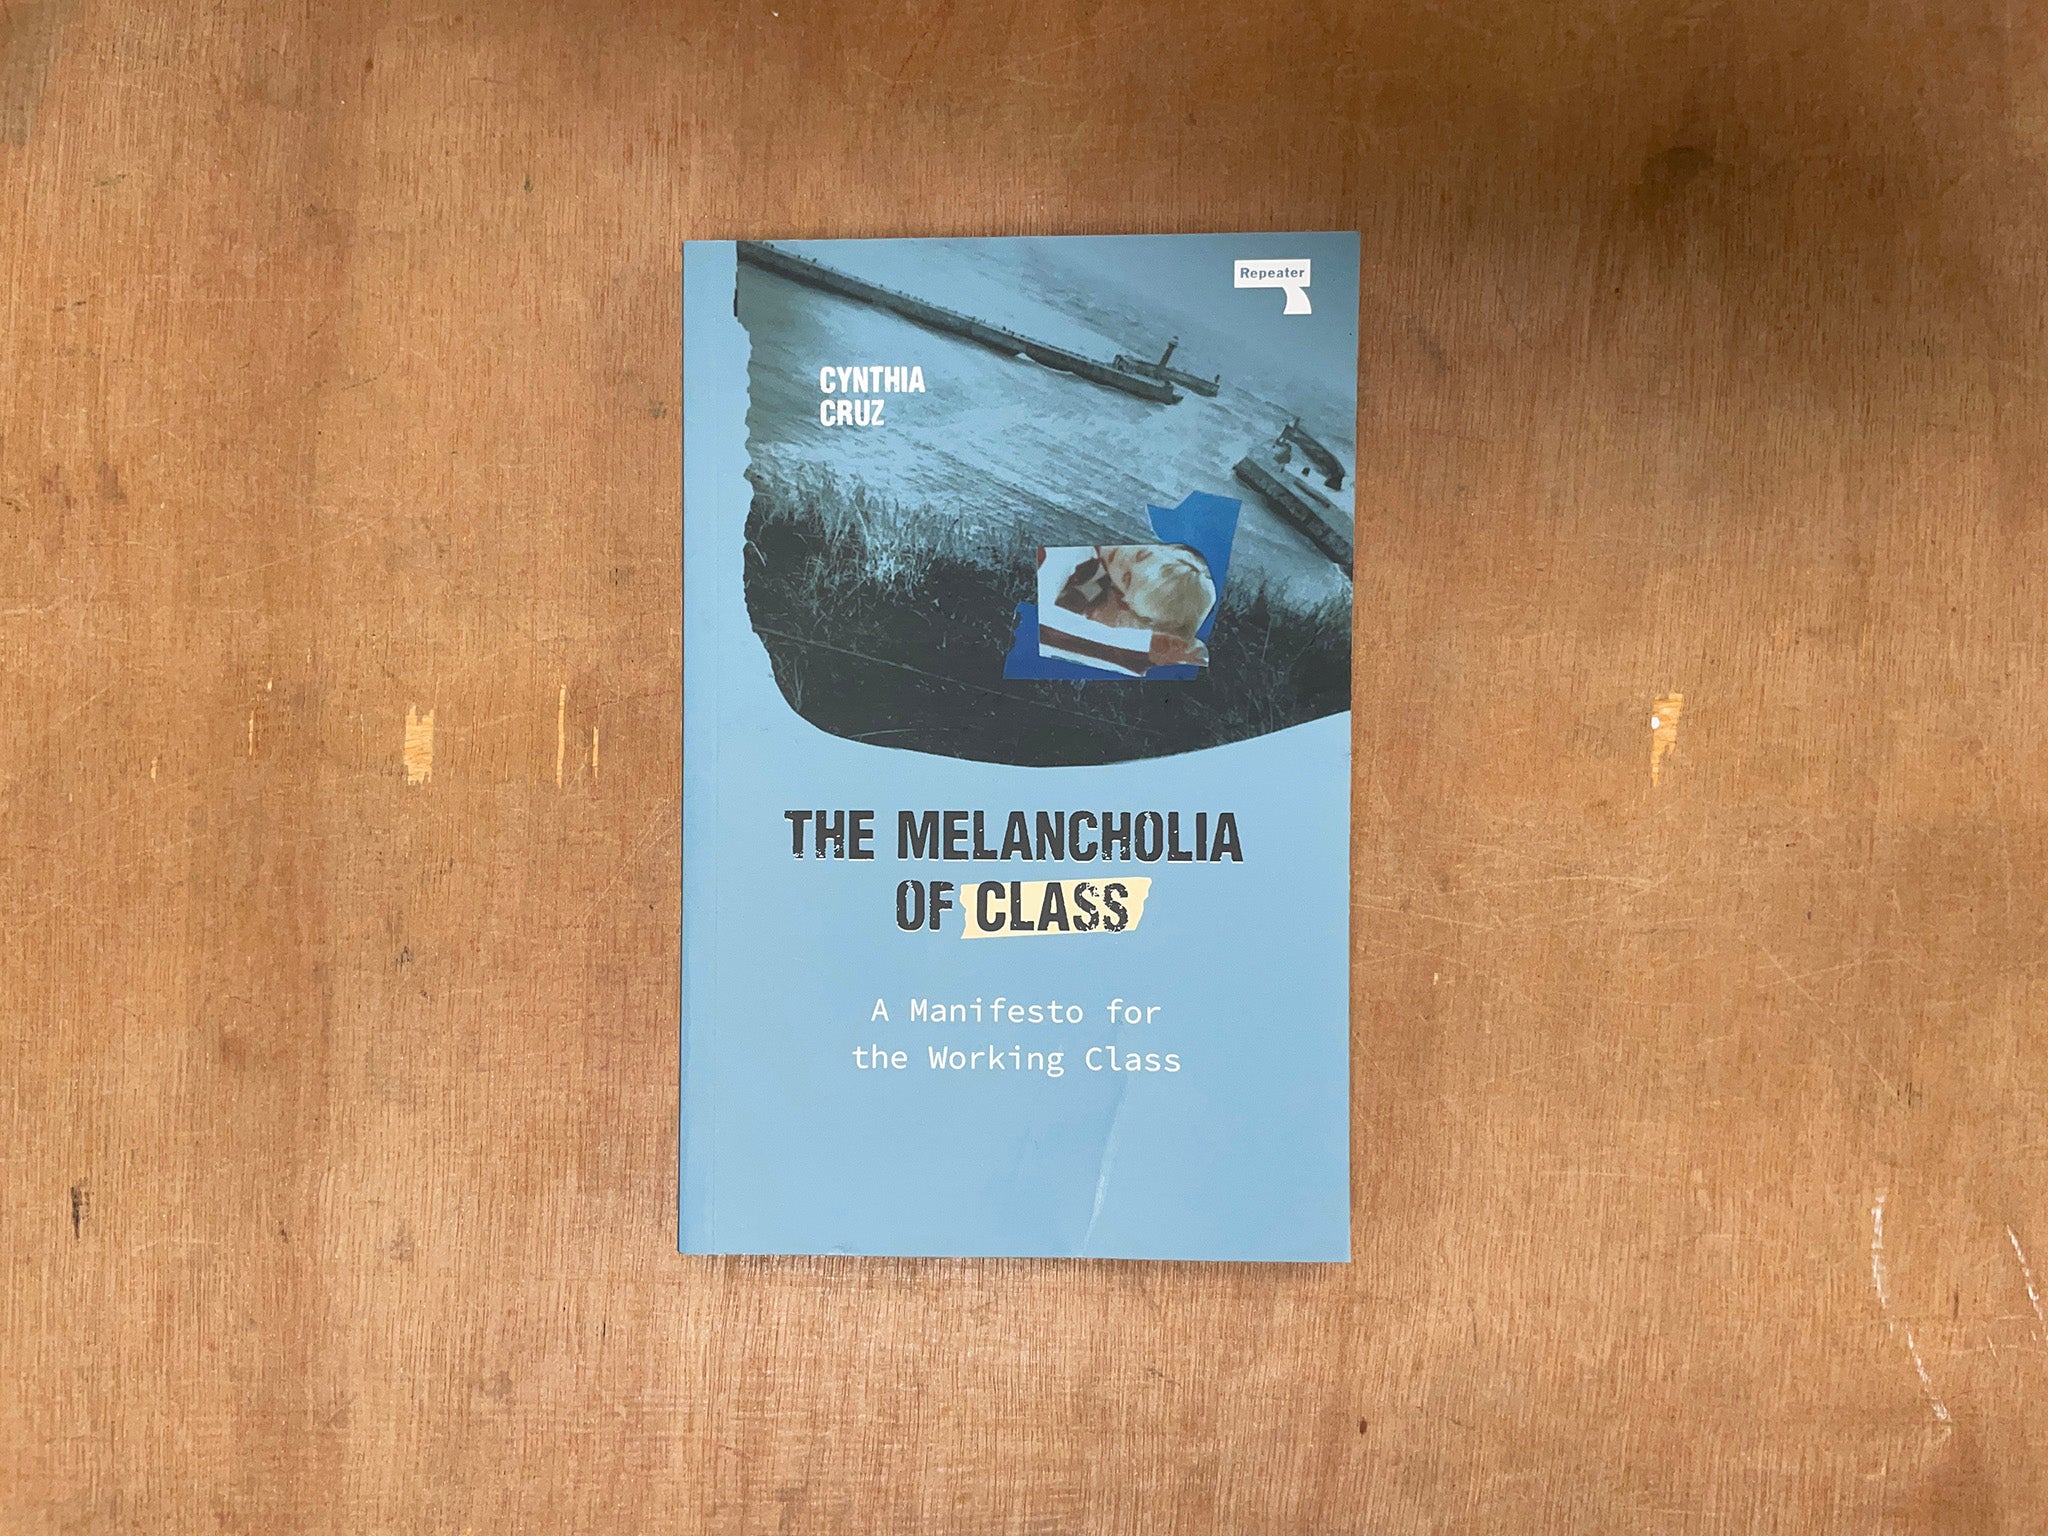 THE MELANCHOLIA OF CLASS: A MANIFESTO FOR THE WORKING CLASS by Cynthia Cruz